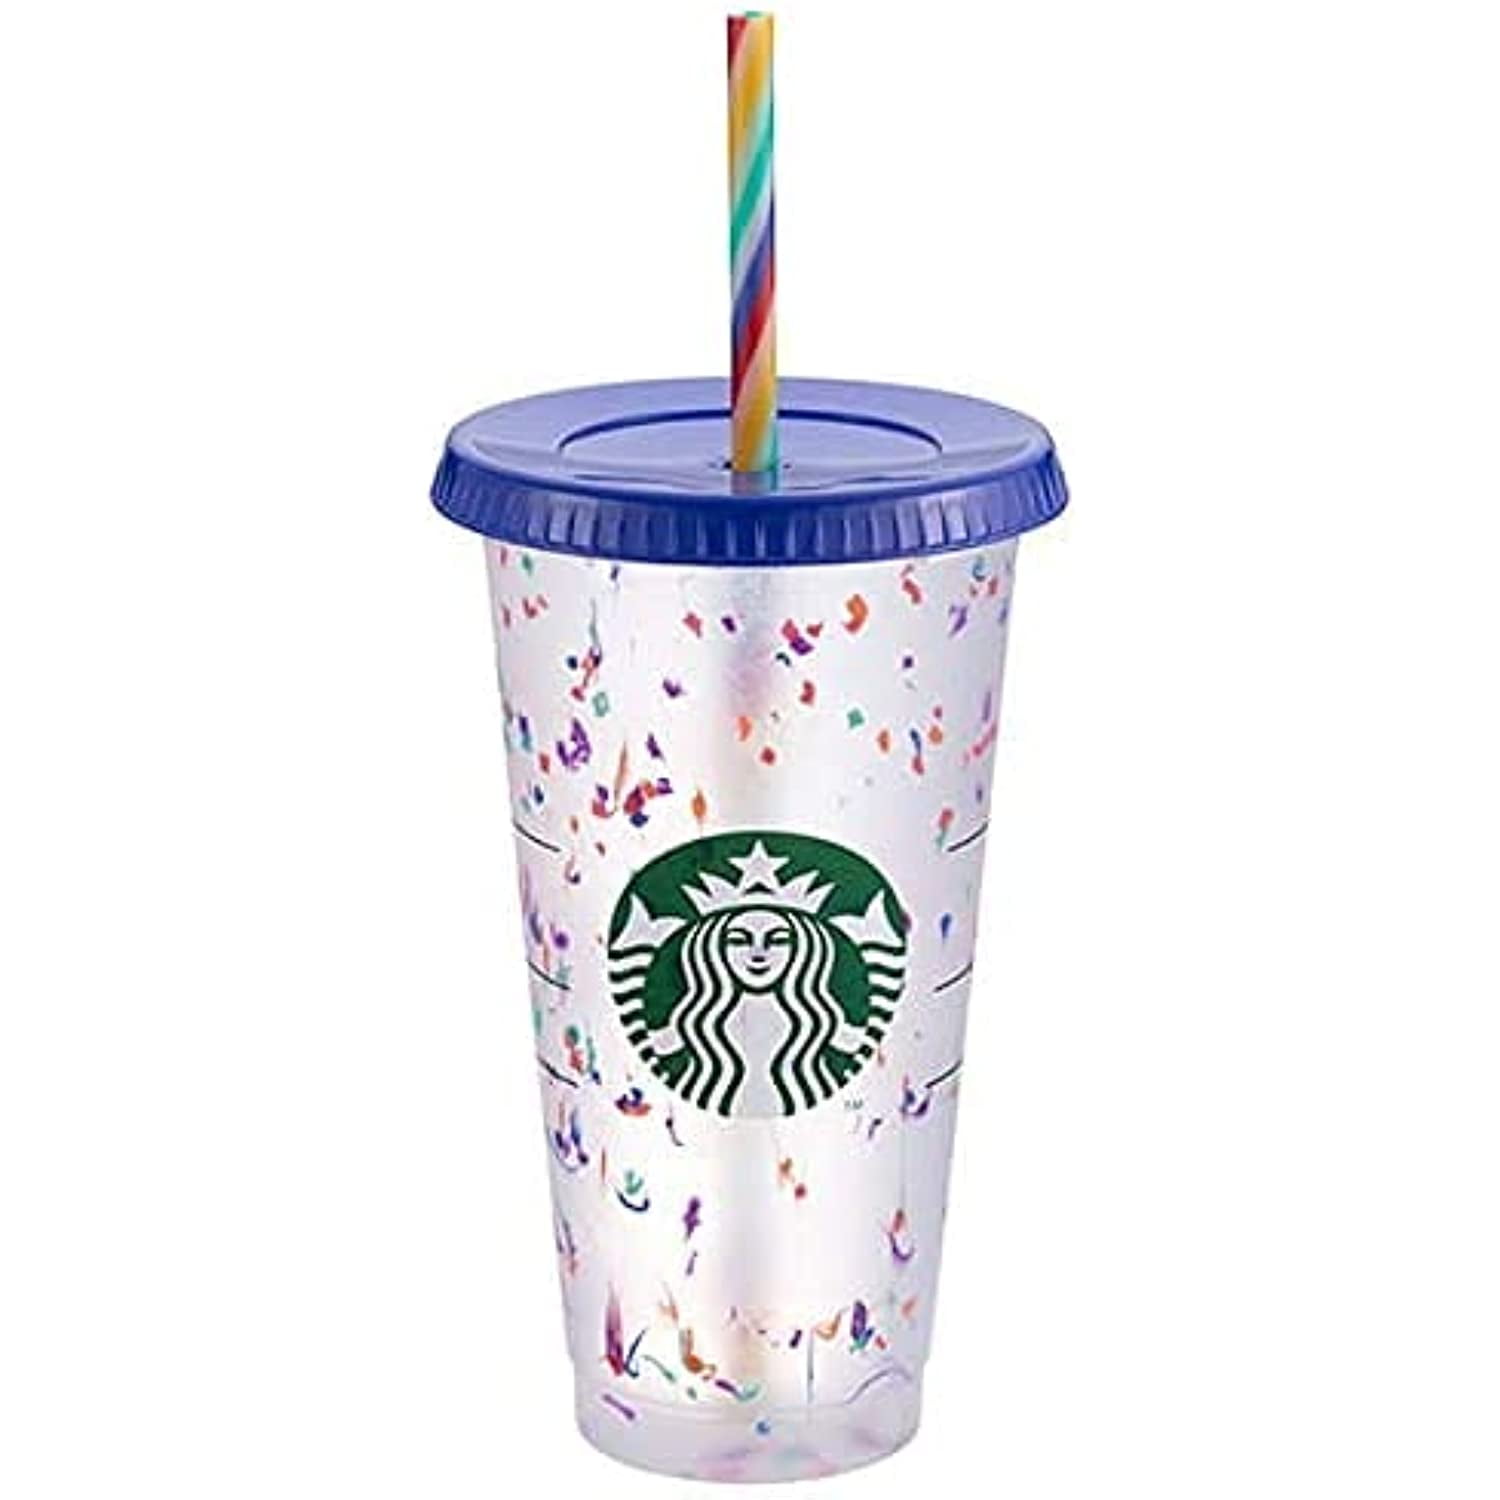 Starbucks Reusable Cold Cup Tumbler with Red Crystals – With Love